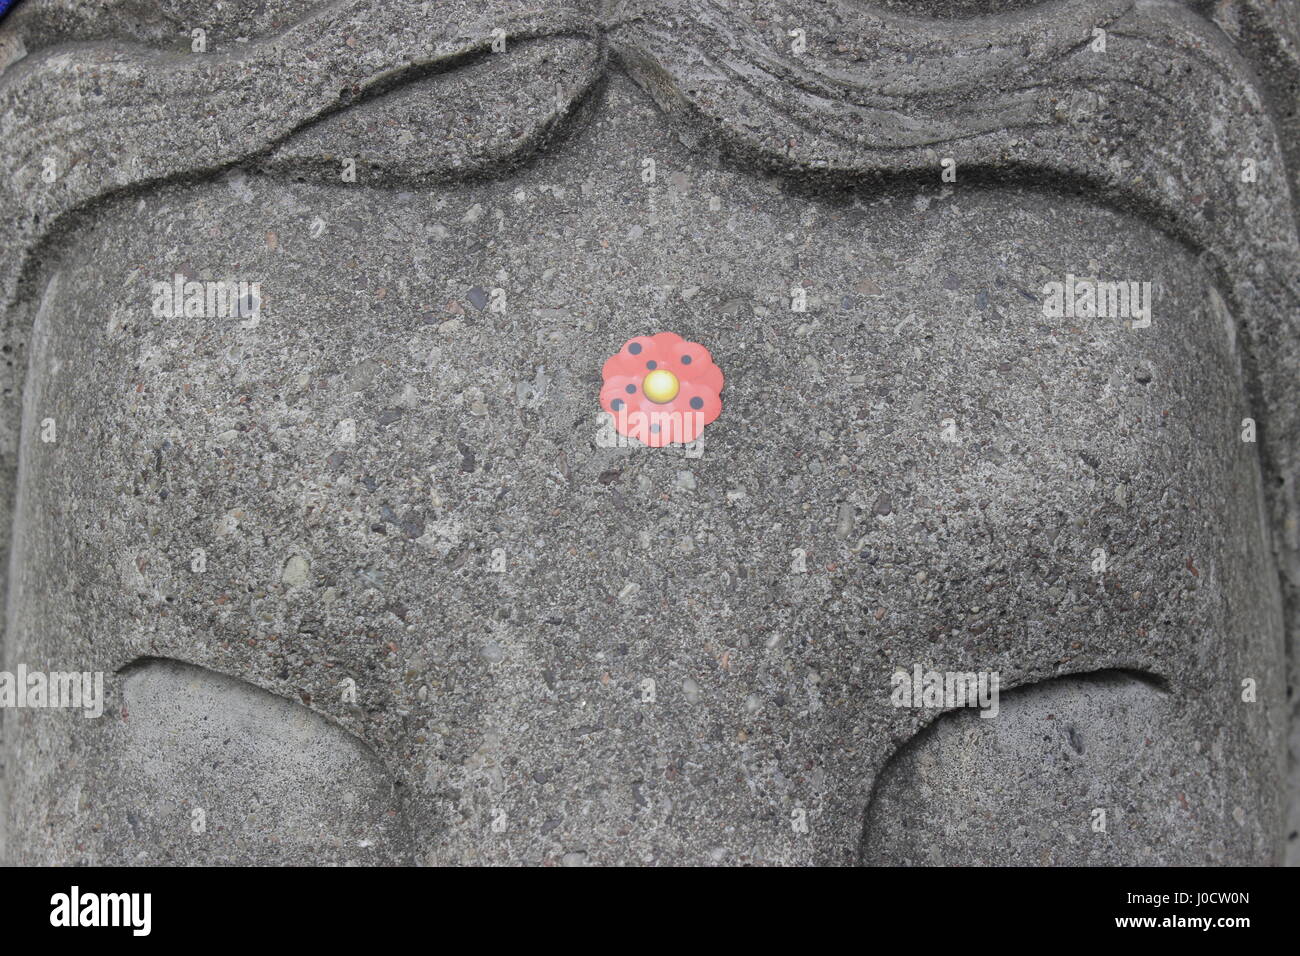 Memorial day. Closeup of a red poppy sticker on the concrete street barricade lion's head, in remembrance of all the Stockholm's terrorist truck attacker victims. Drottninggatan (Queen Street) & Kungsgatan, Stockolm city, Sweden. Credit: BasilT/Alamy Live News Stock Photo